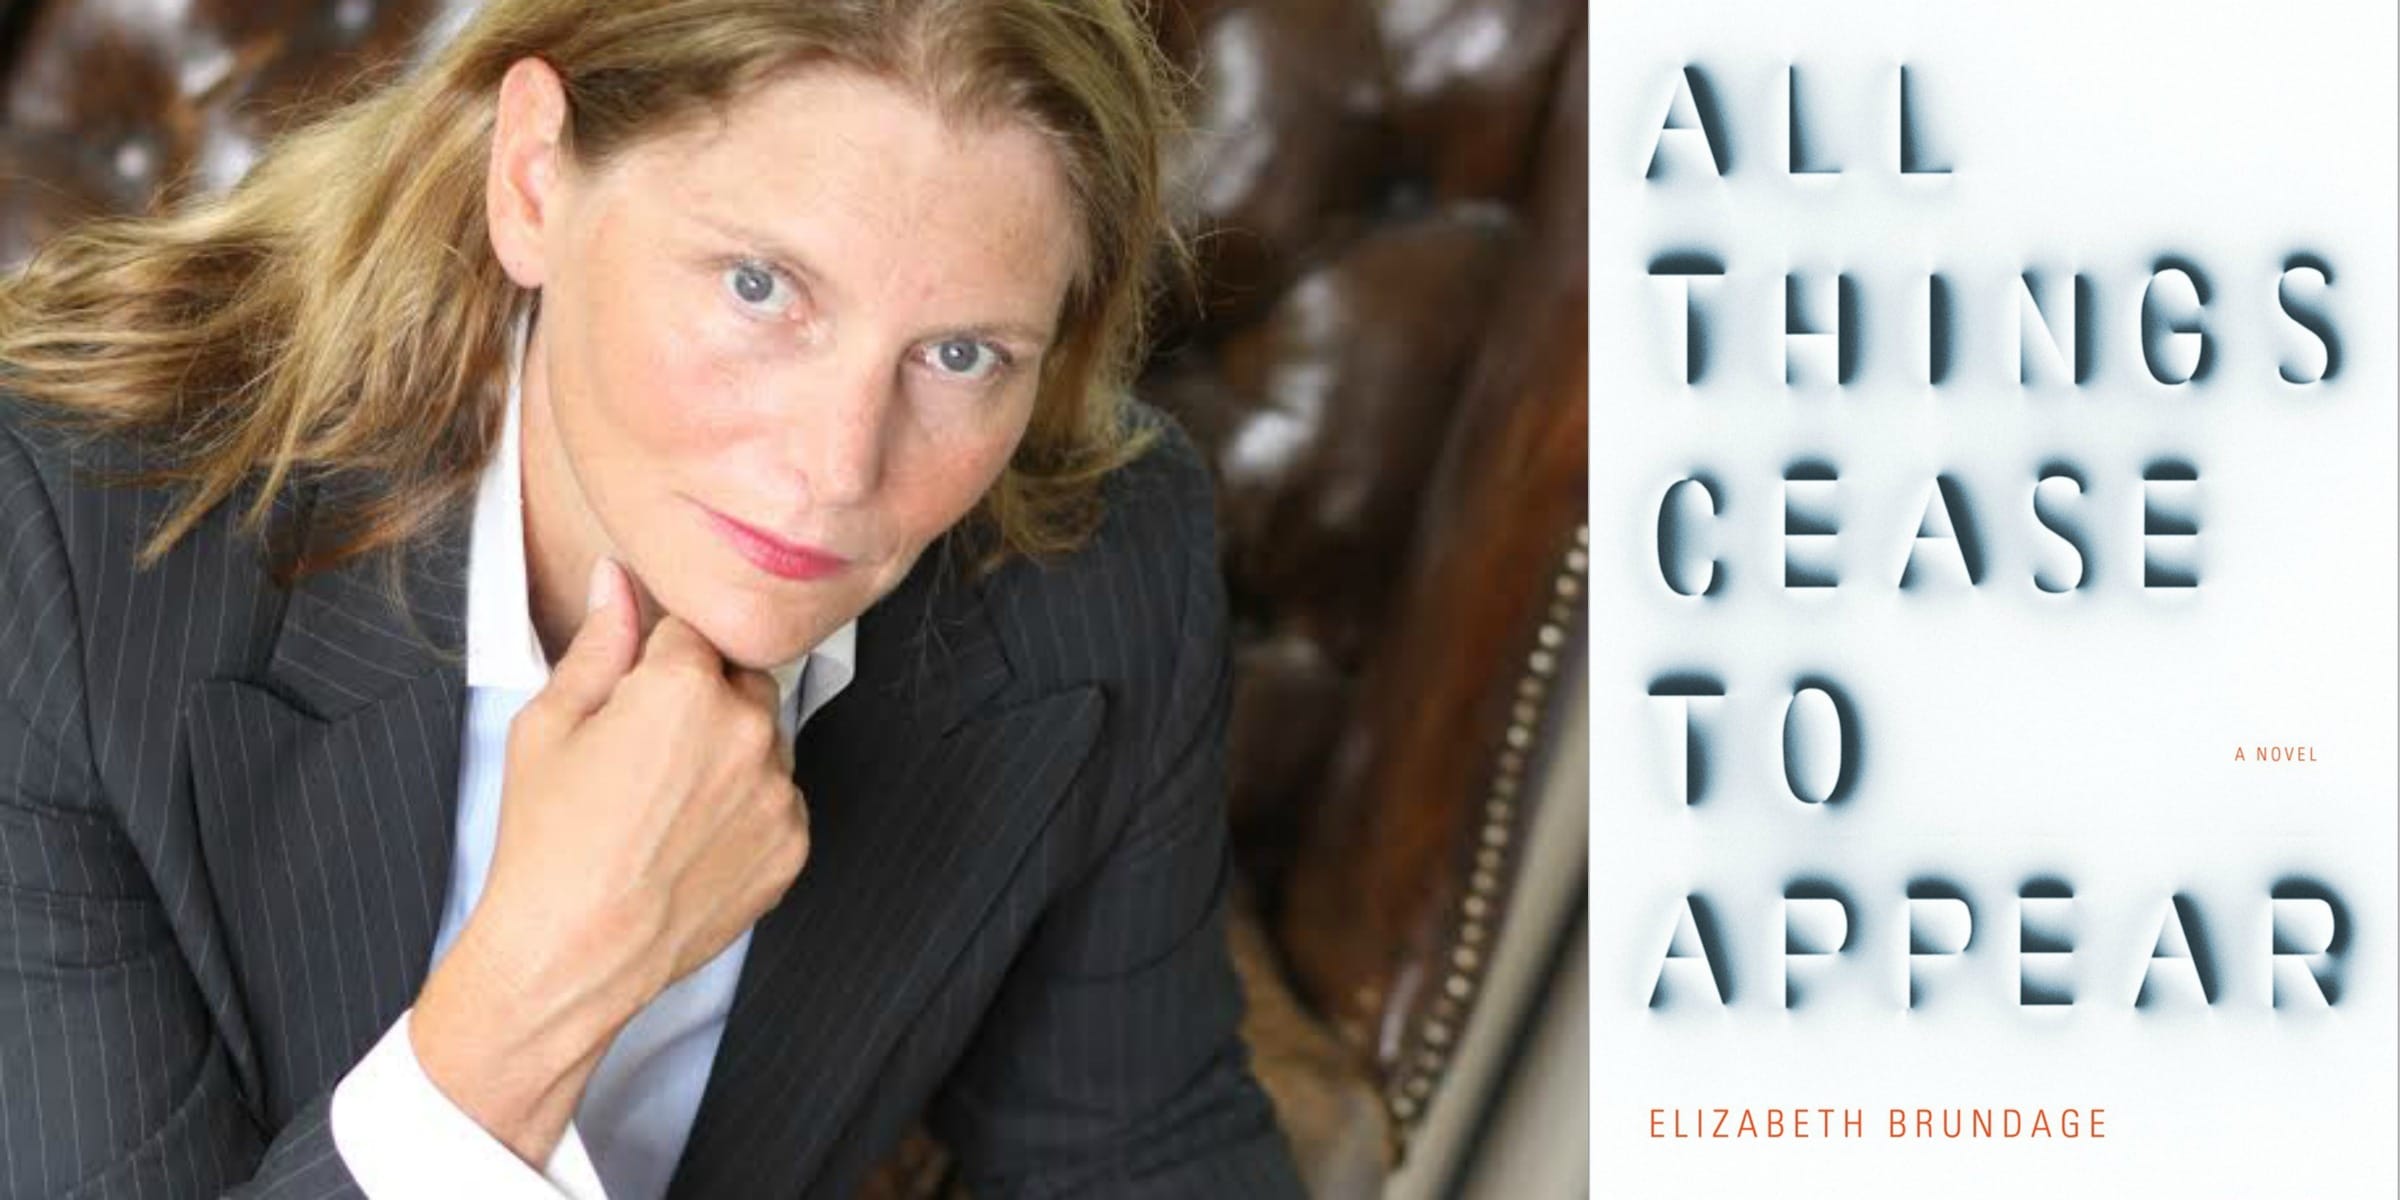 Sundays With Writers: All Things Cease to Appear by Elizabeth ...